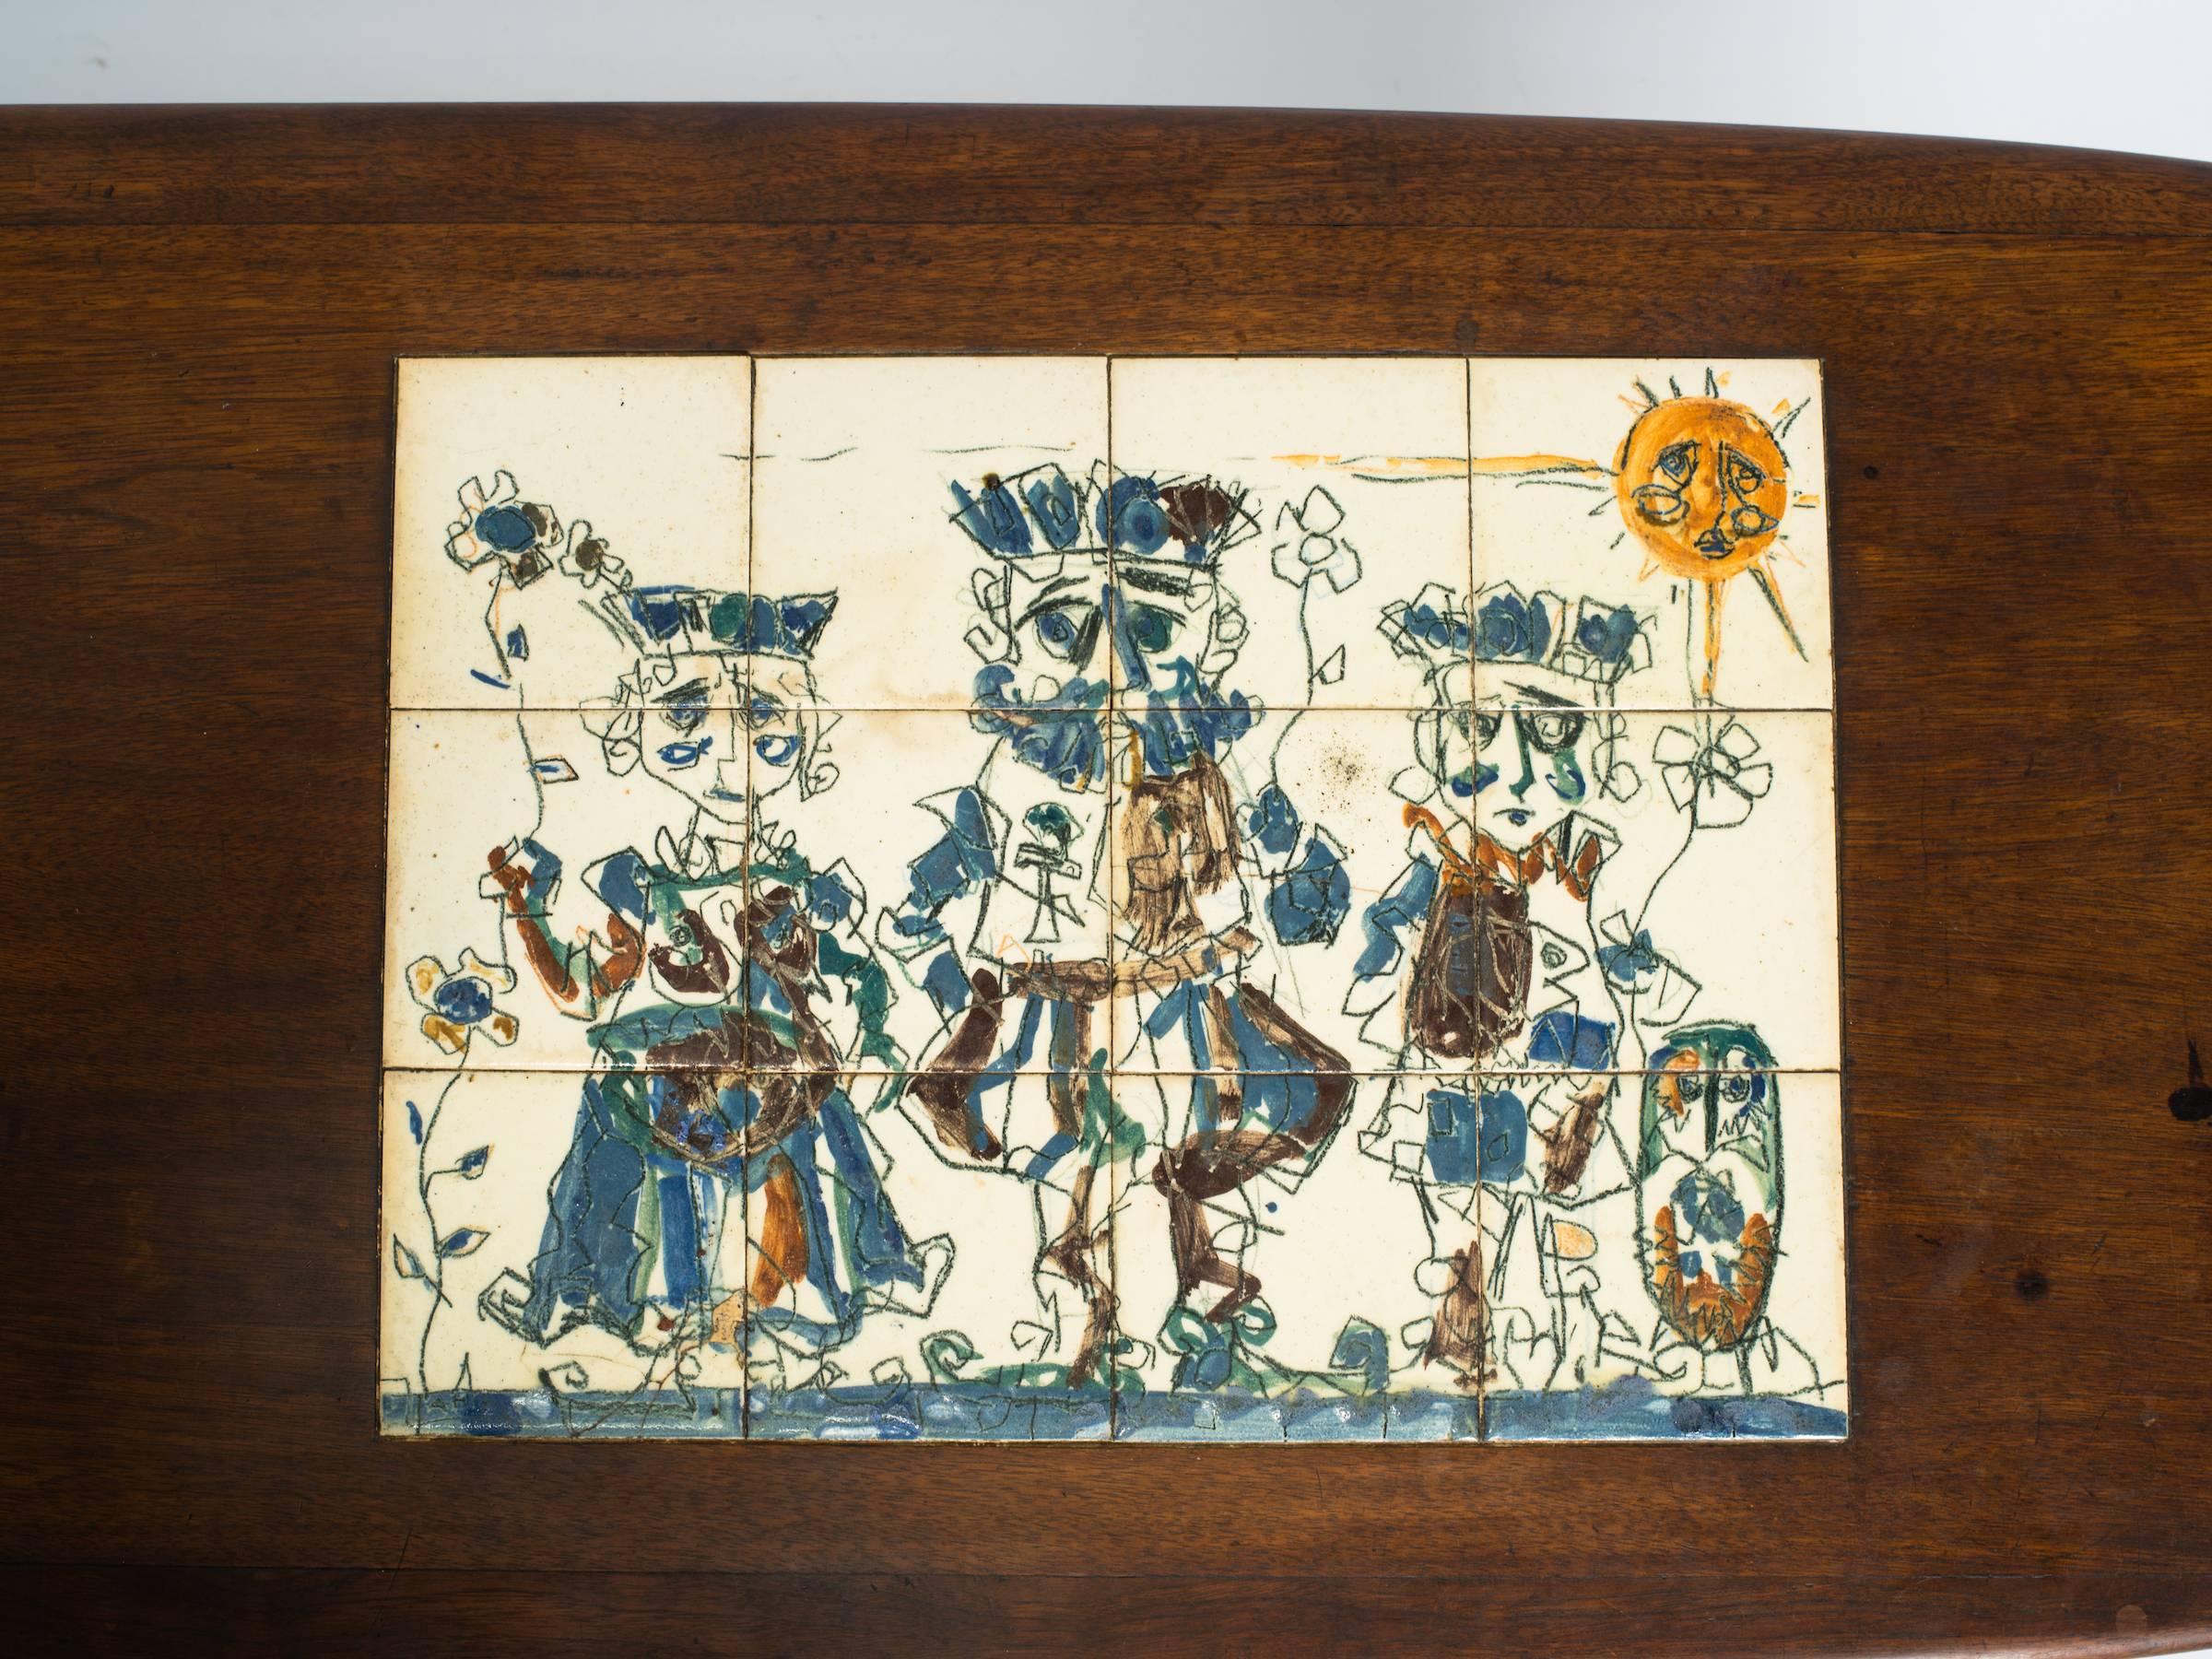 Hand-painted tile top table by the artist Alvin Hollingsworth. Hollingsworth was the first African-American comic book artist who then became famous for his modern paintings.